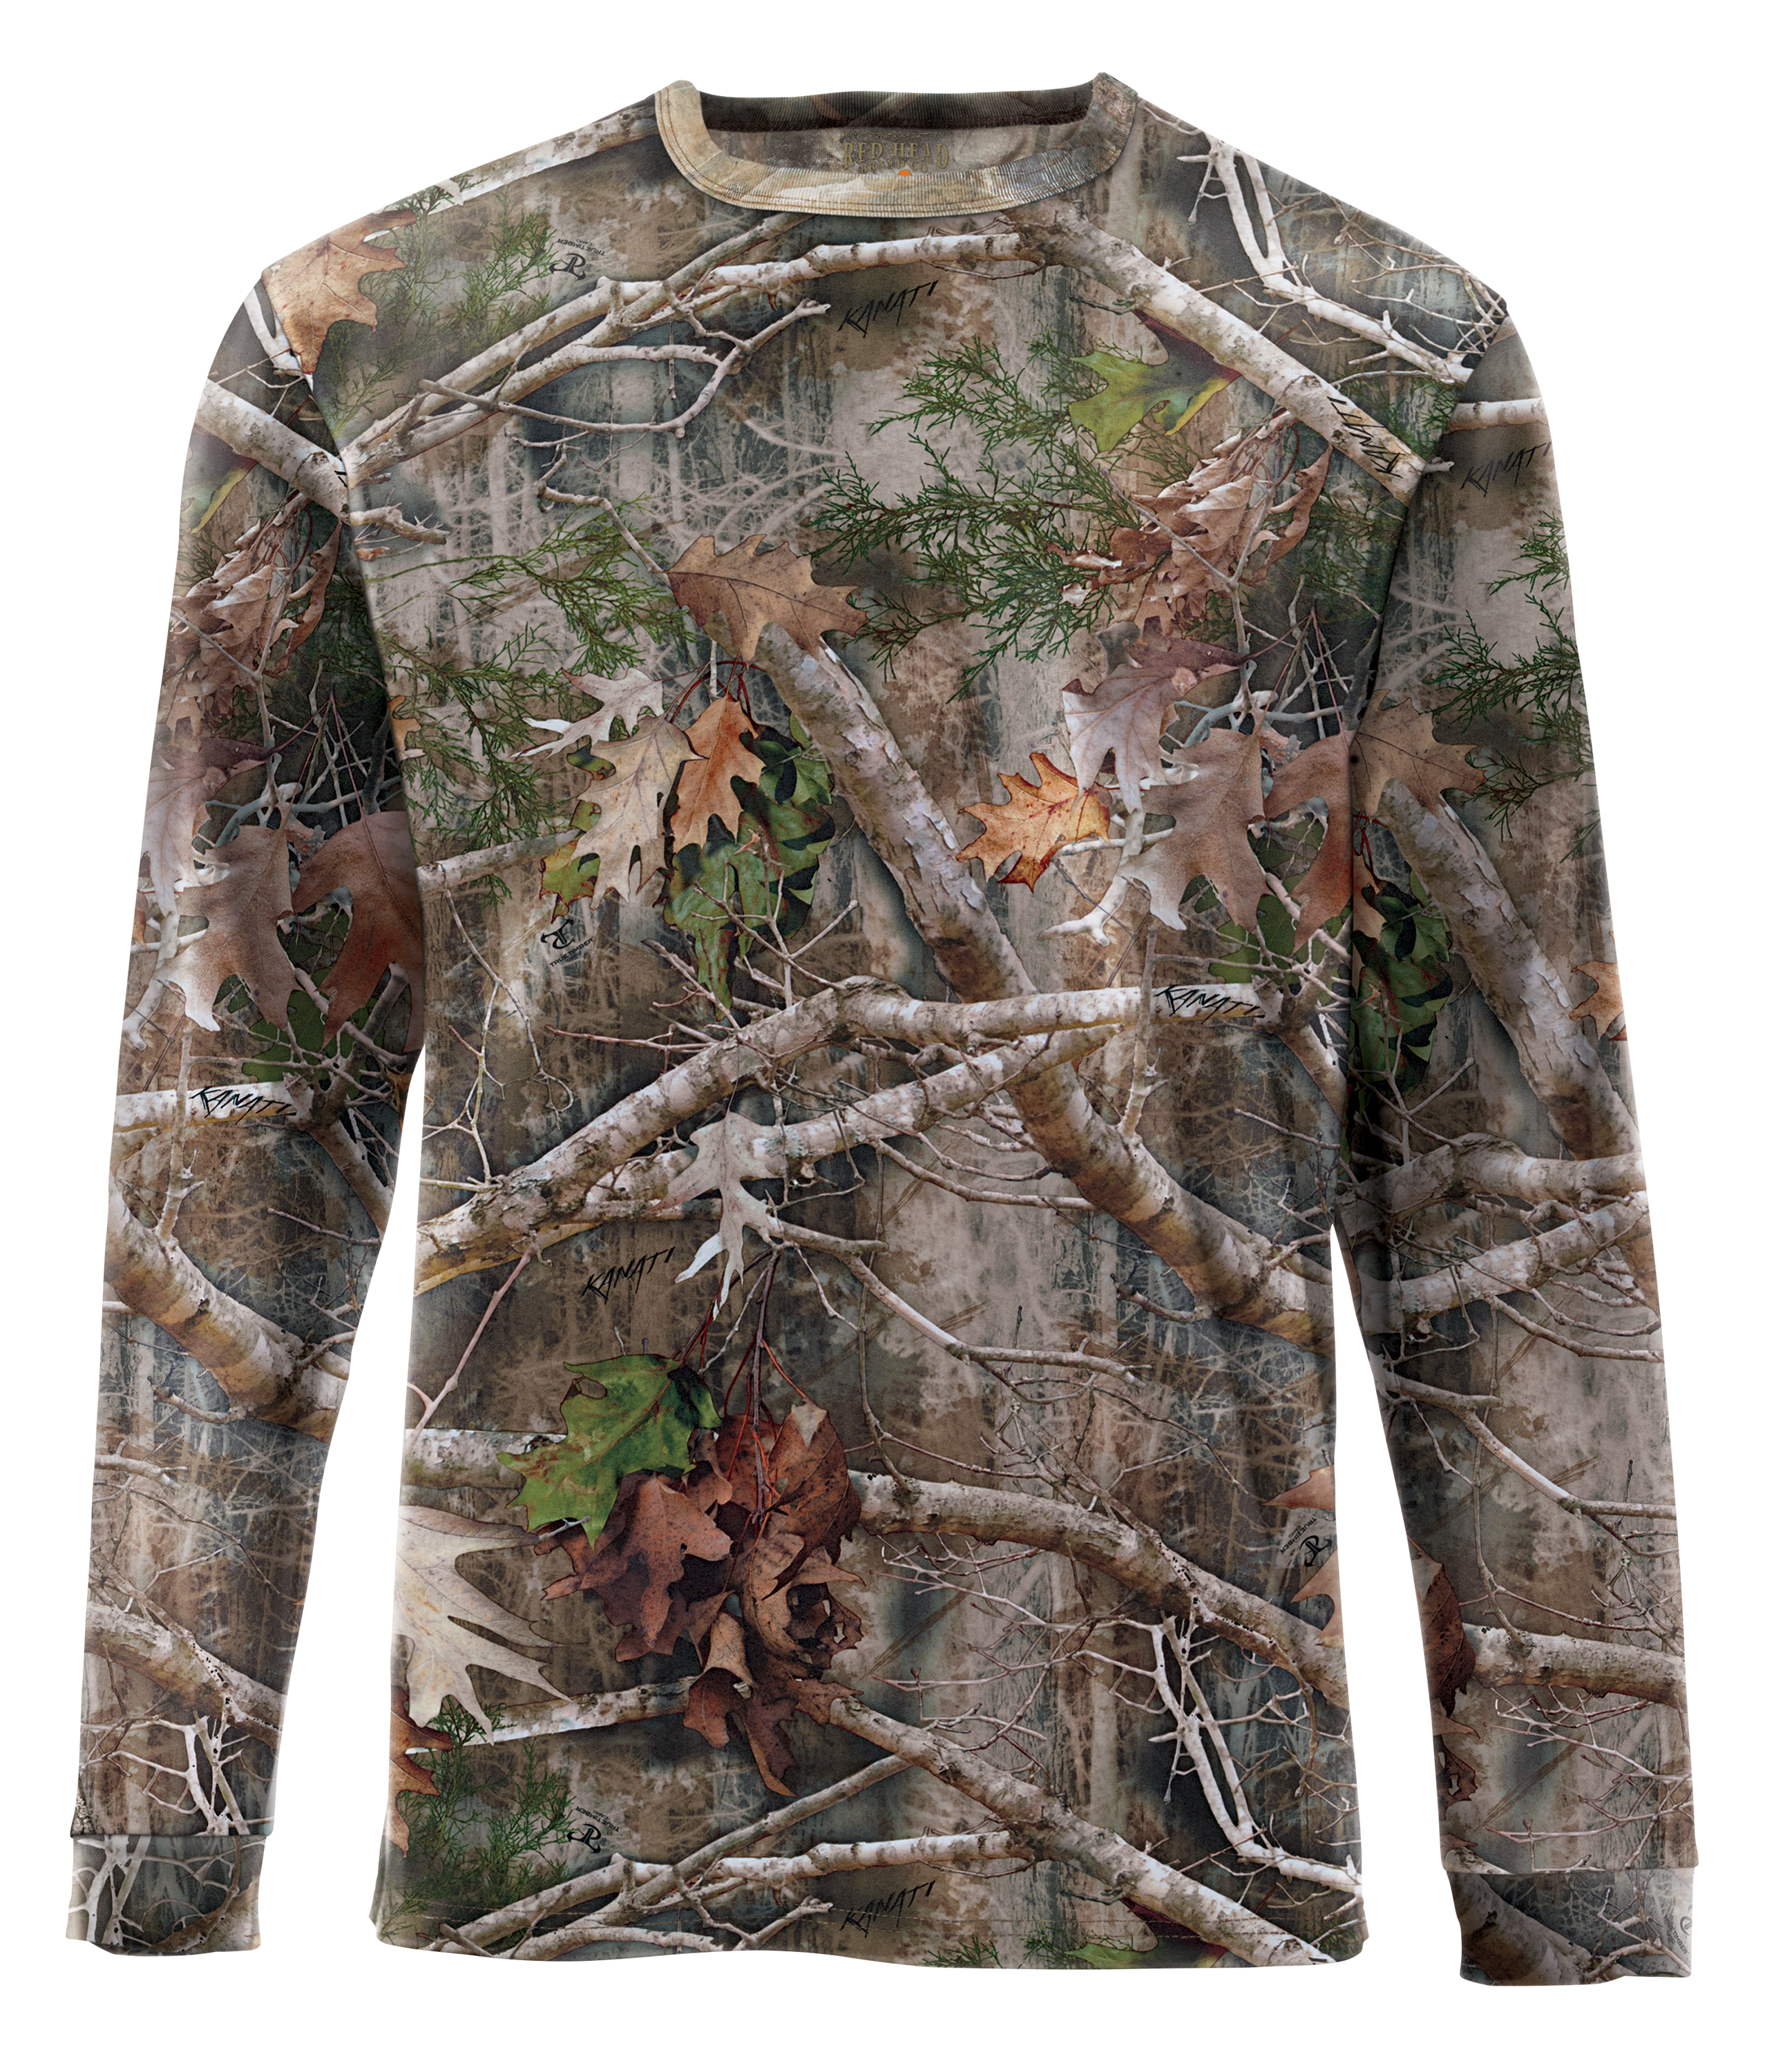 IWOM EL Insulated Camo Full Body Warm Hunting Suit